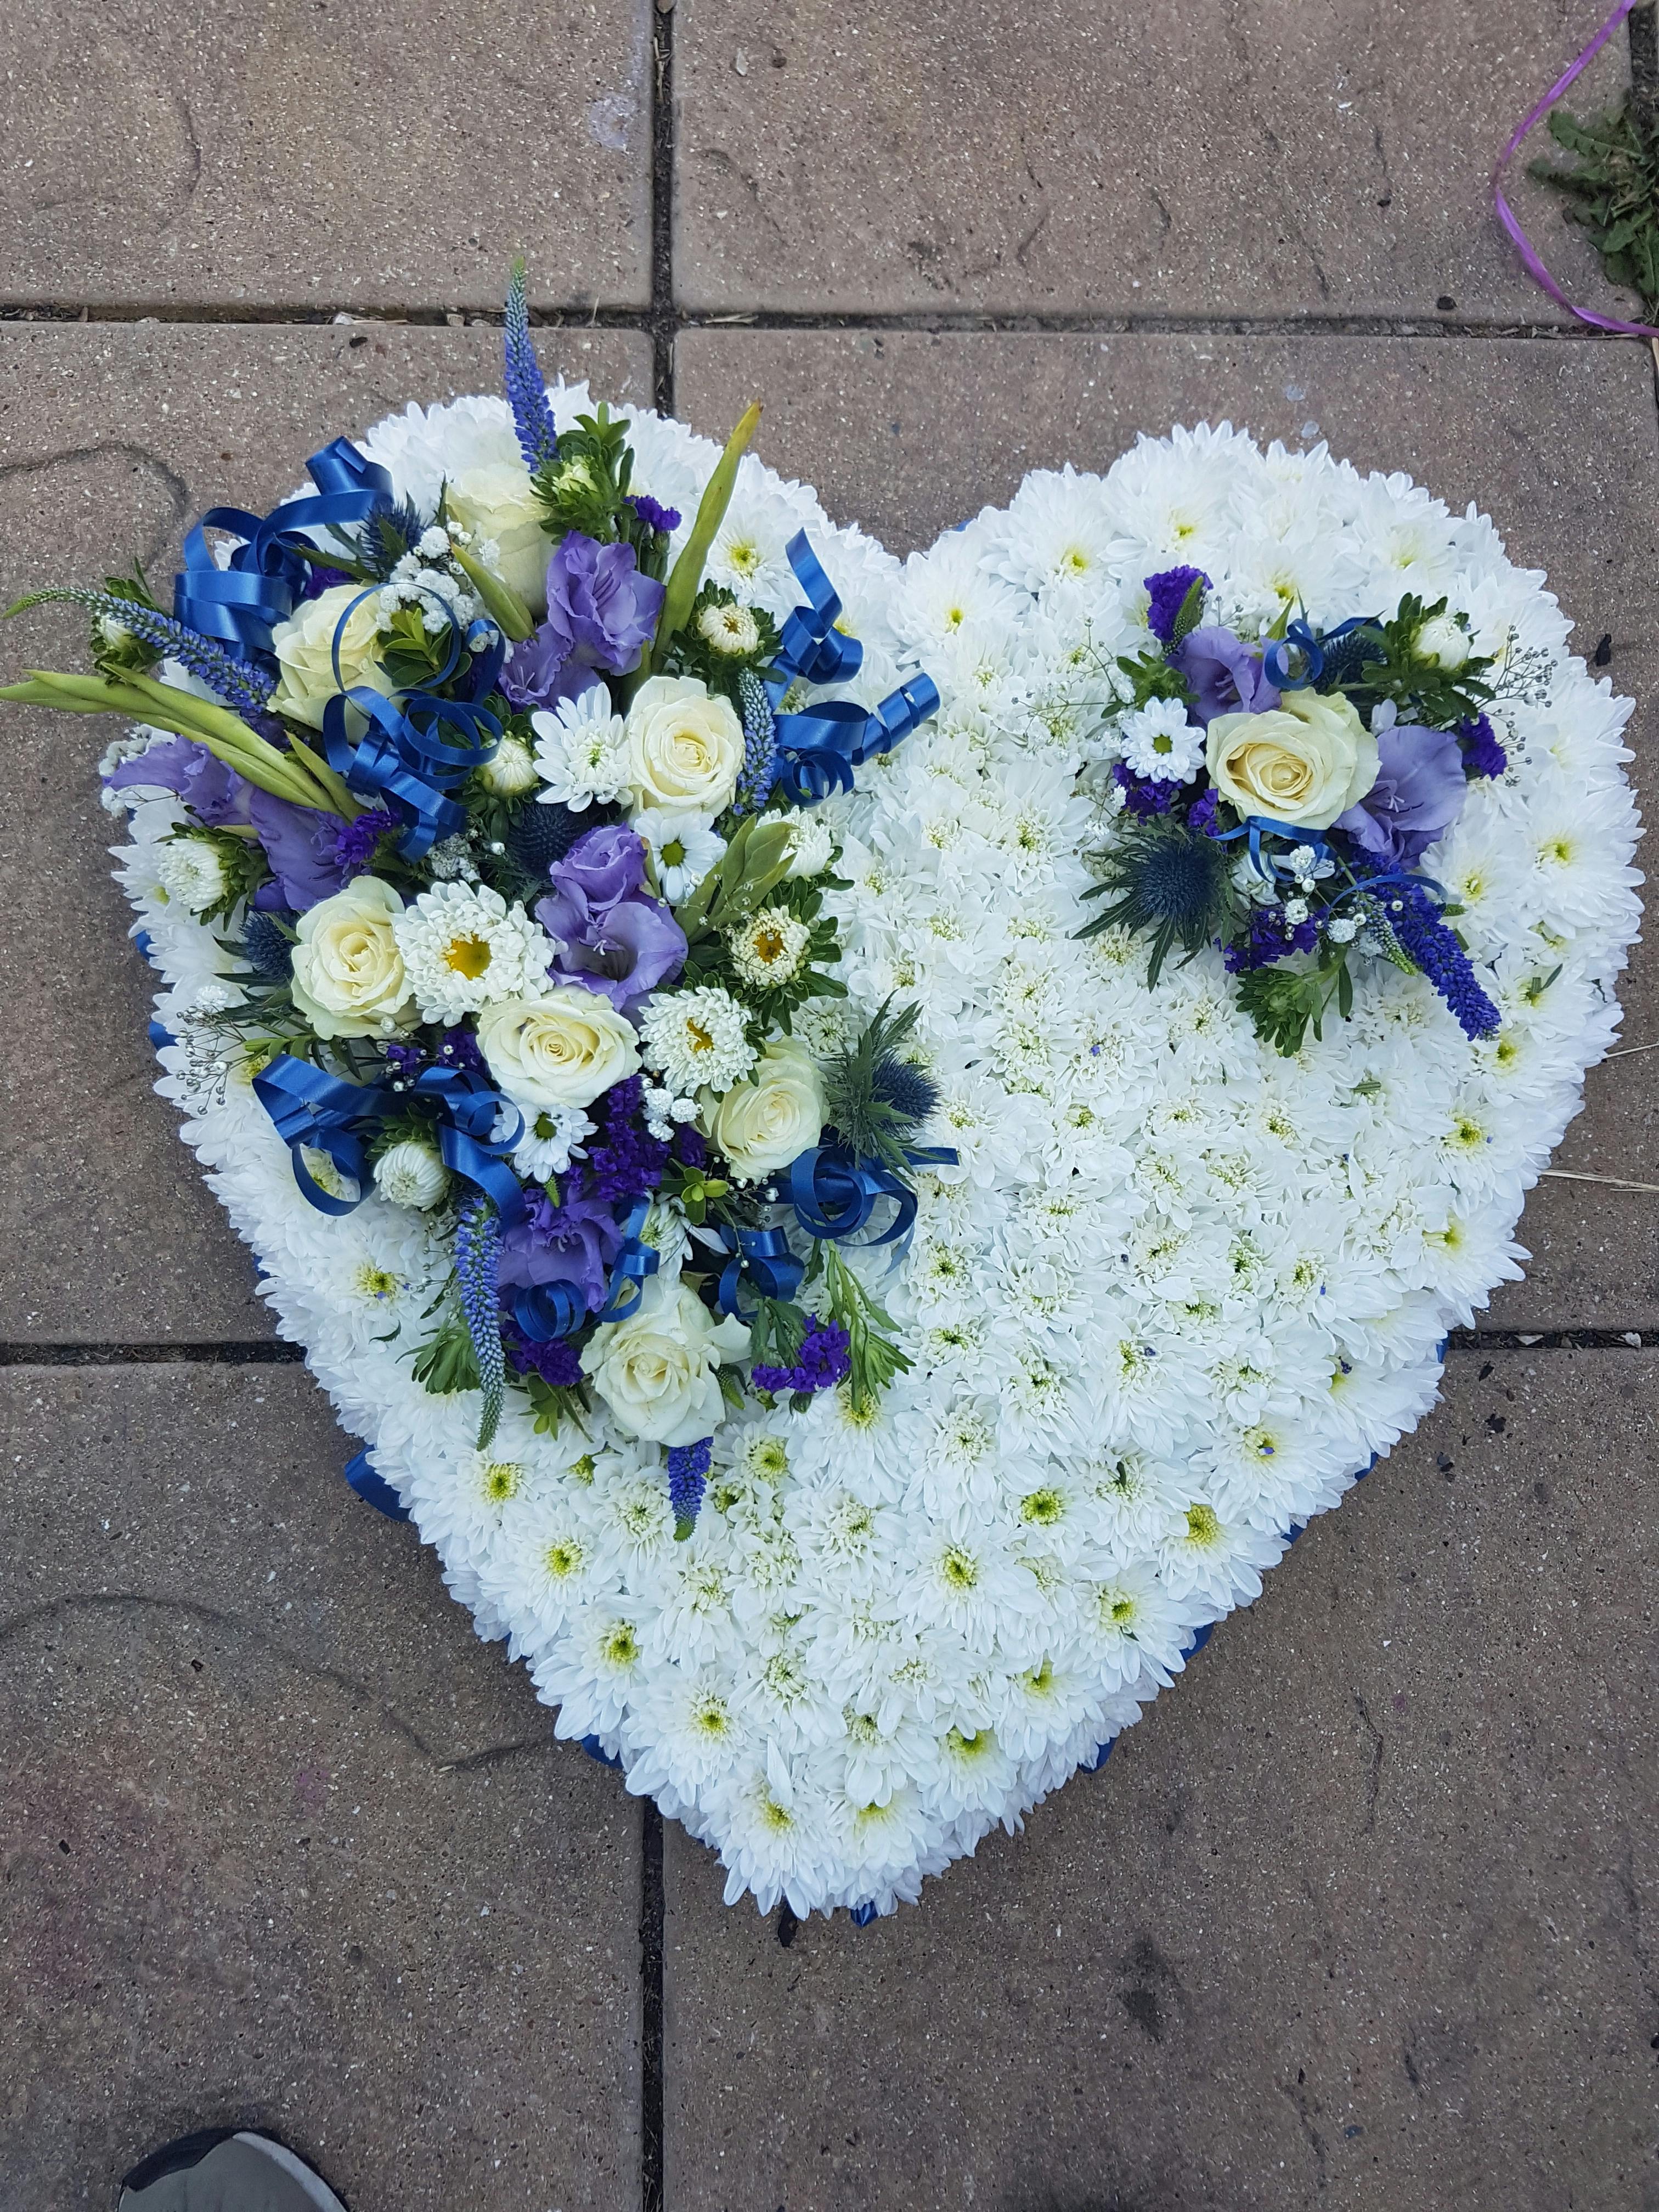 Free stock photo of Flowers funeral